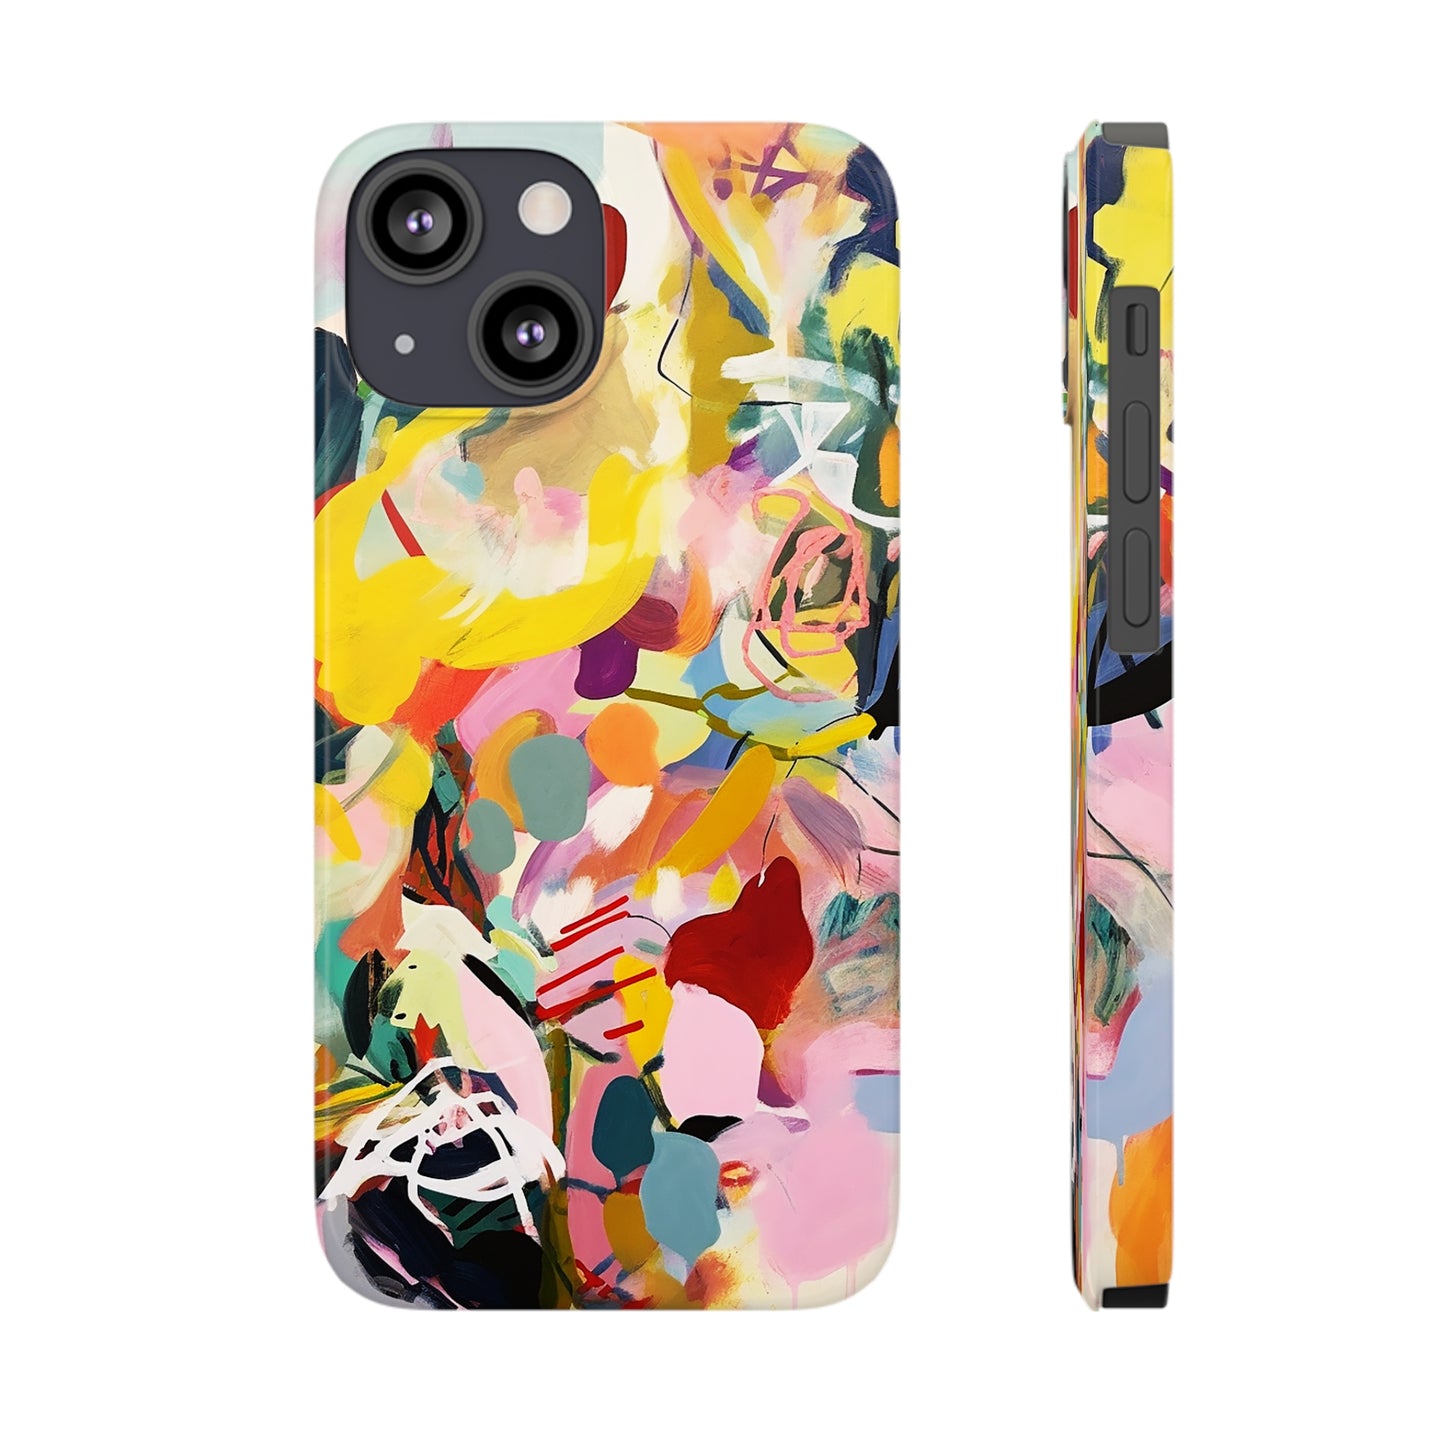 Bright Abstract Slim Phone iCases